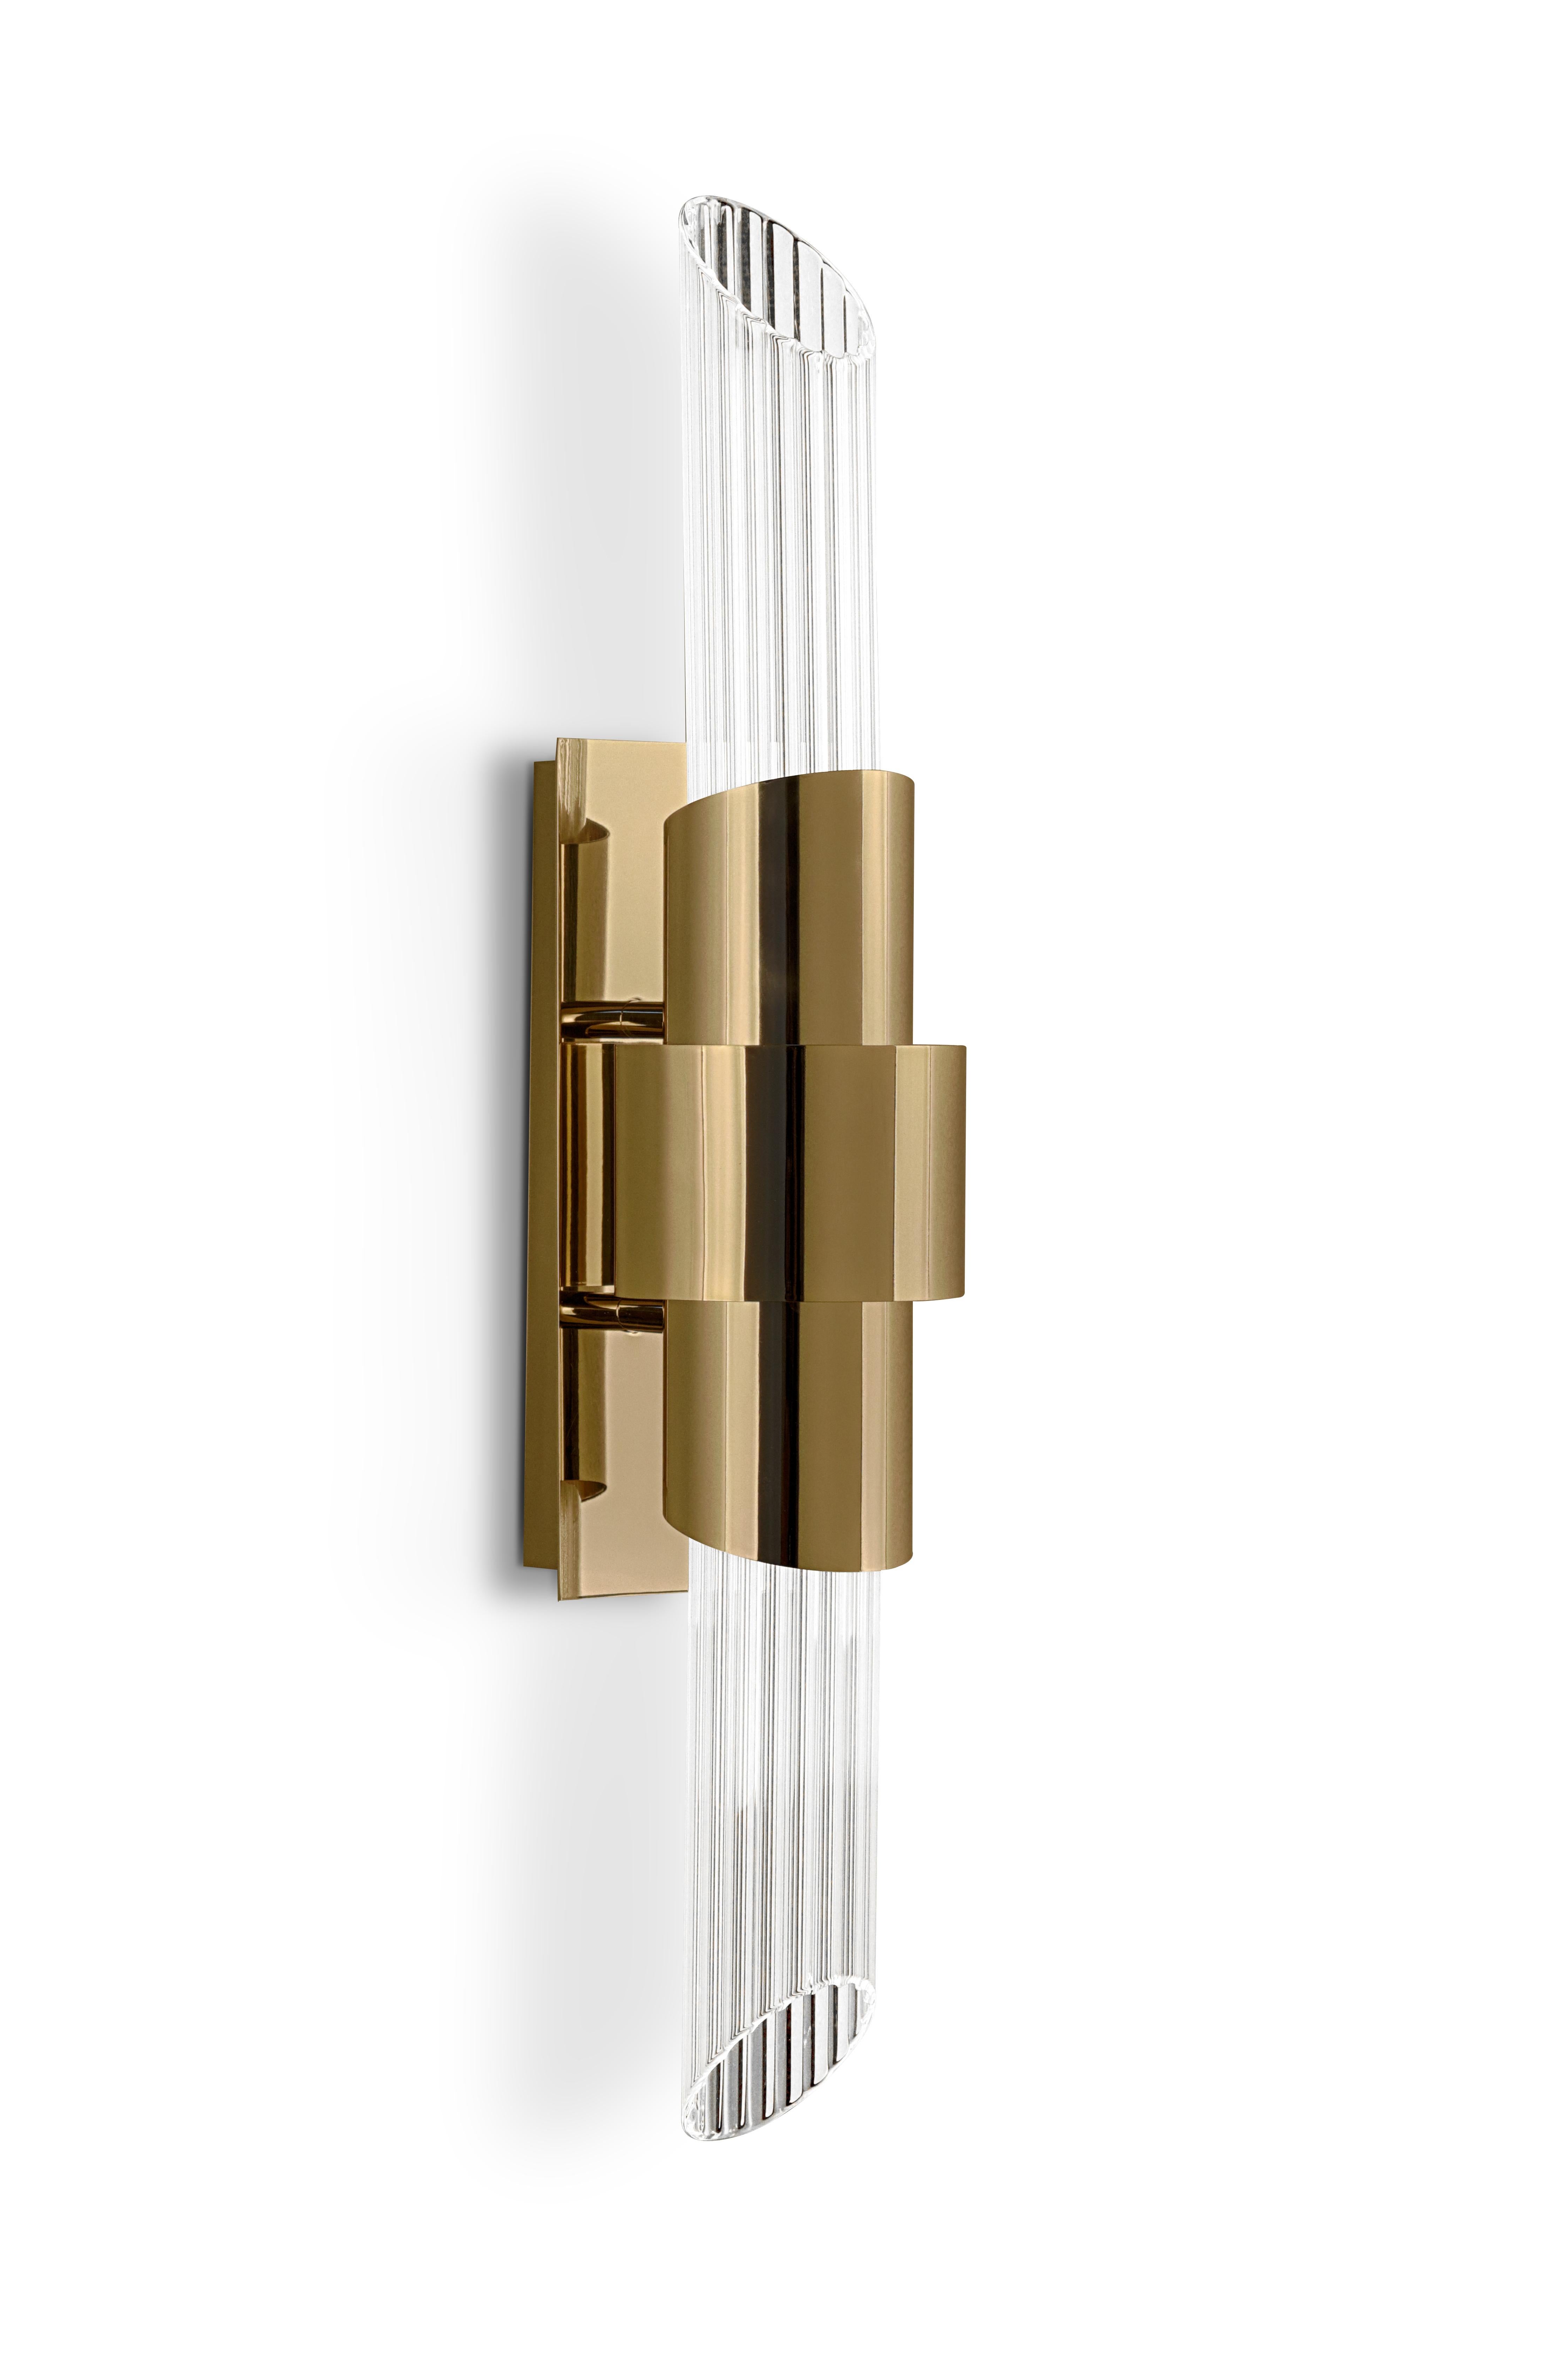 Following the creation line, the small version of Tycho Wall creates a cosmopolitan luxury environment that conveys an intimate lighting as its building inspiration and its reflection on the water. Brass with gold plated and crystal glass, ideal